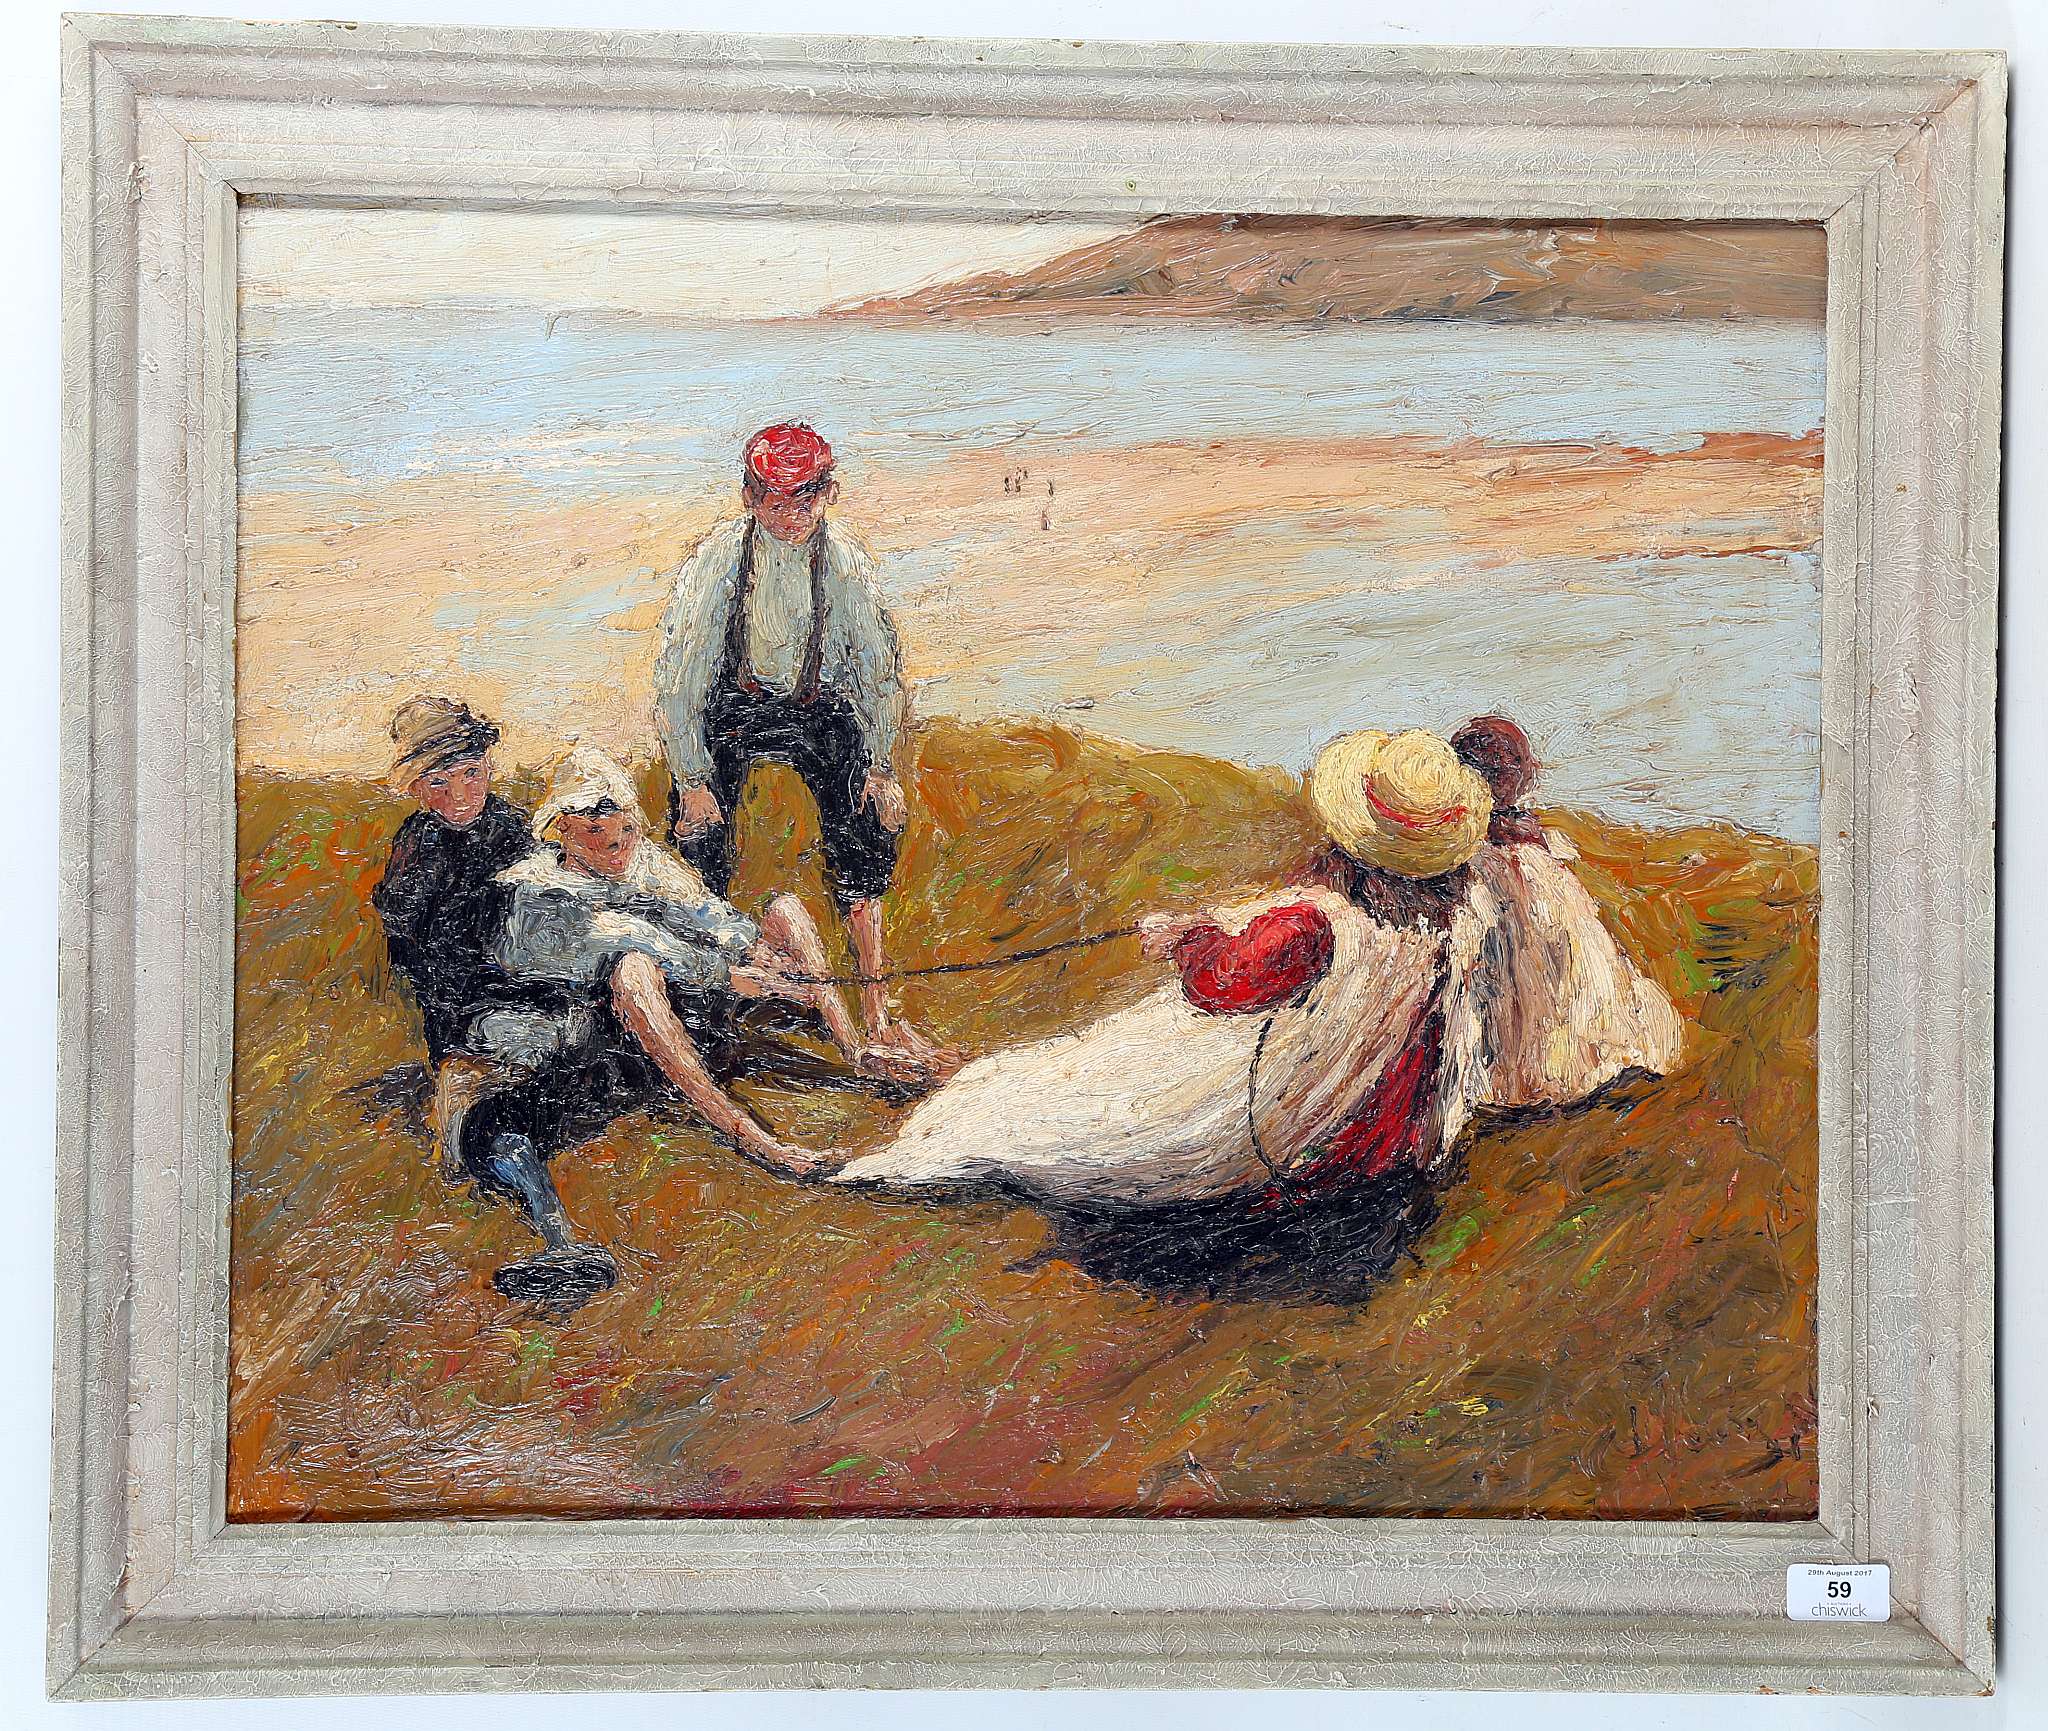 Continental School, early 20th century Impressionistic oil on linen, indistinctly signed lower